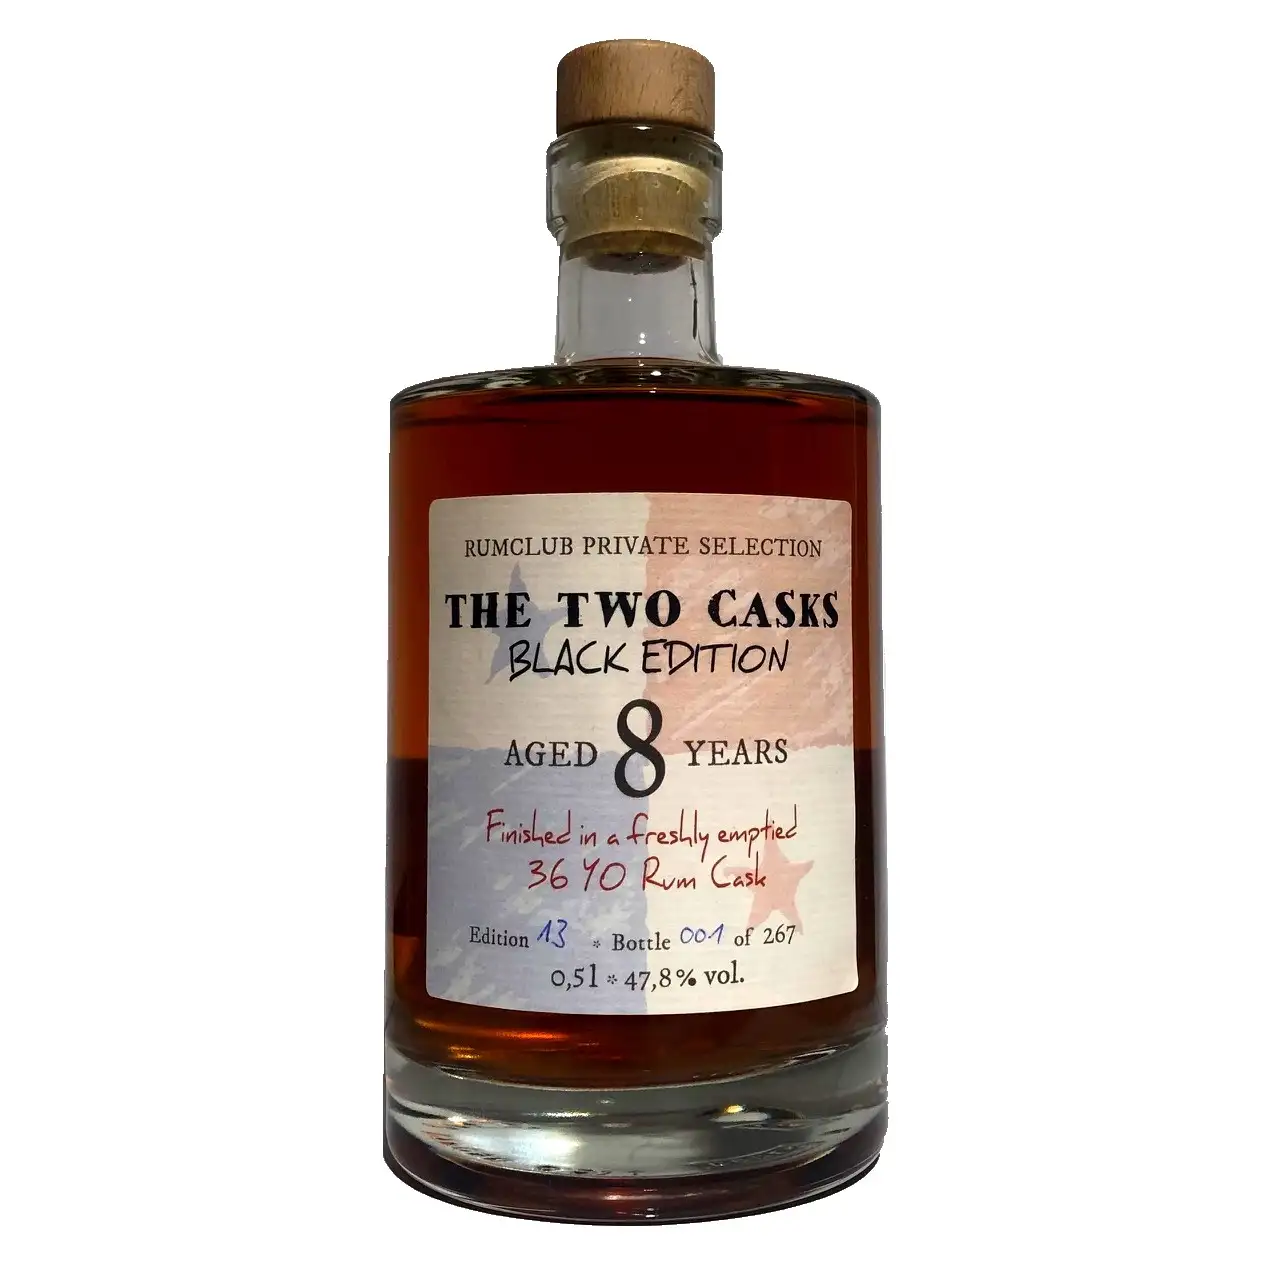 Image of the front of the bottle of the rum Rumclub Private Selection Ed. 13 The Two Casks Black Edition